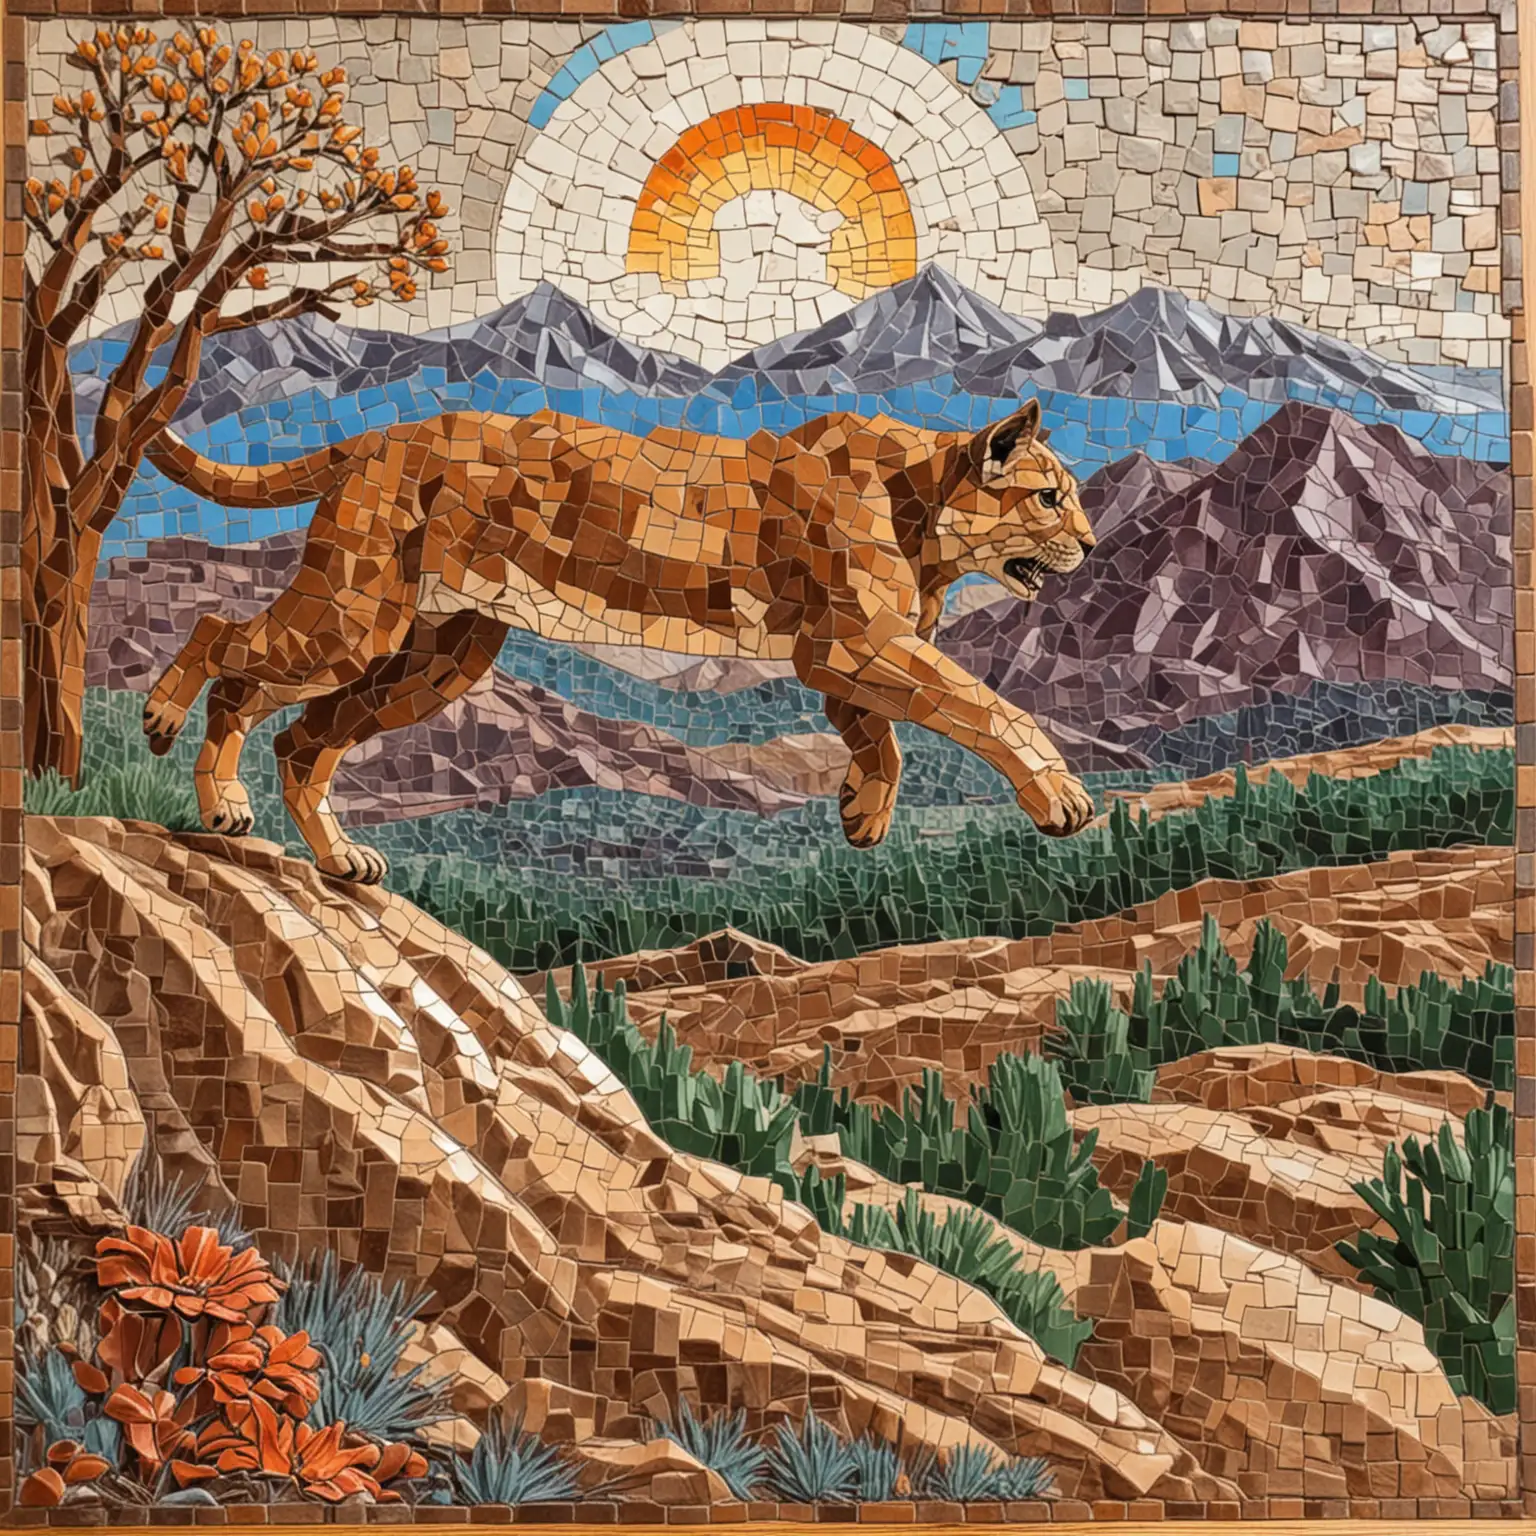 New Mexico Ceramic Tile Mosaic with Jumping Mountain Lion Relief